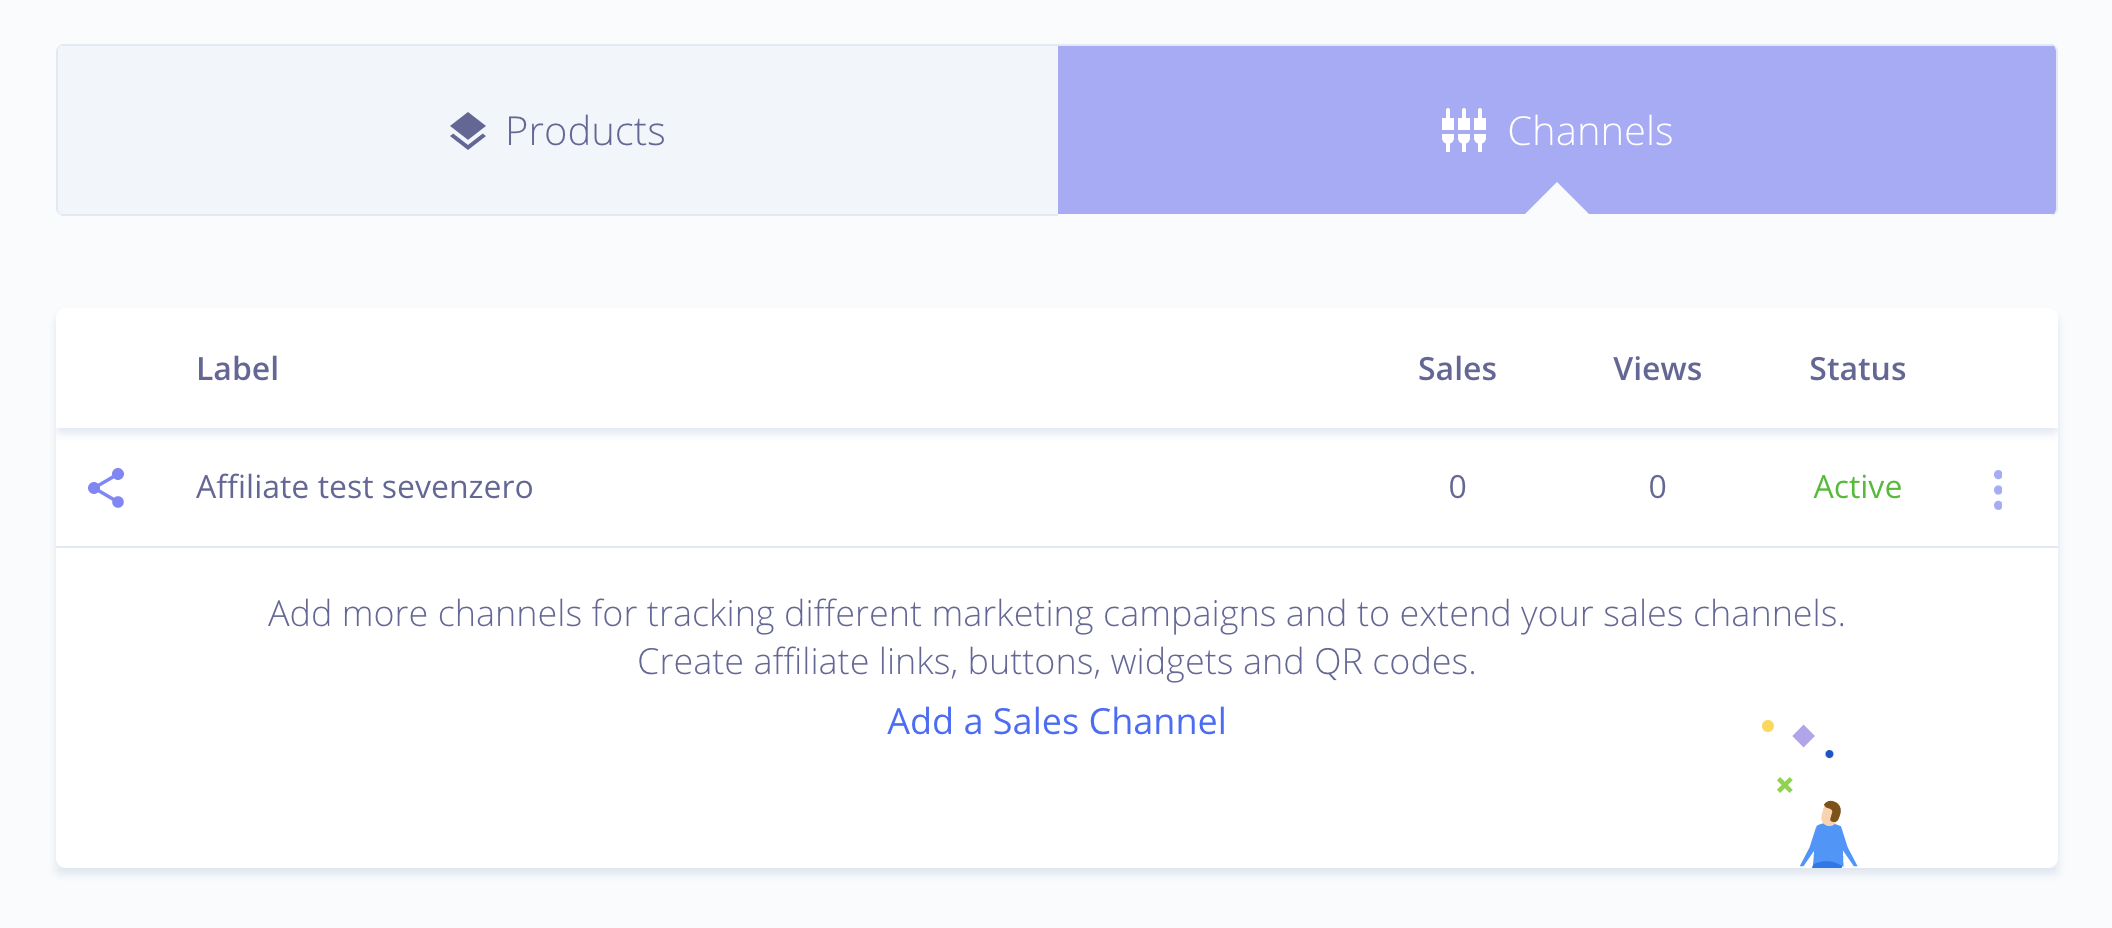 7.0: Marketing Automation, Email Editor, New Payment Integrations, New Dashboard and many more features